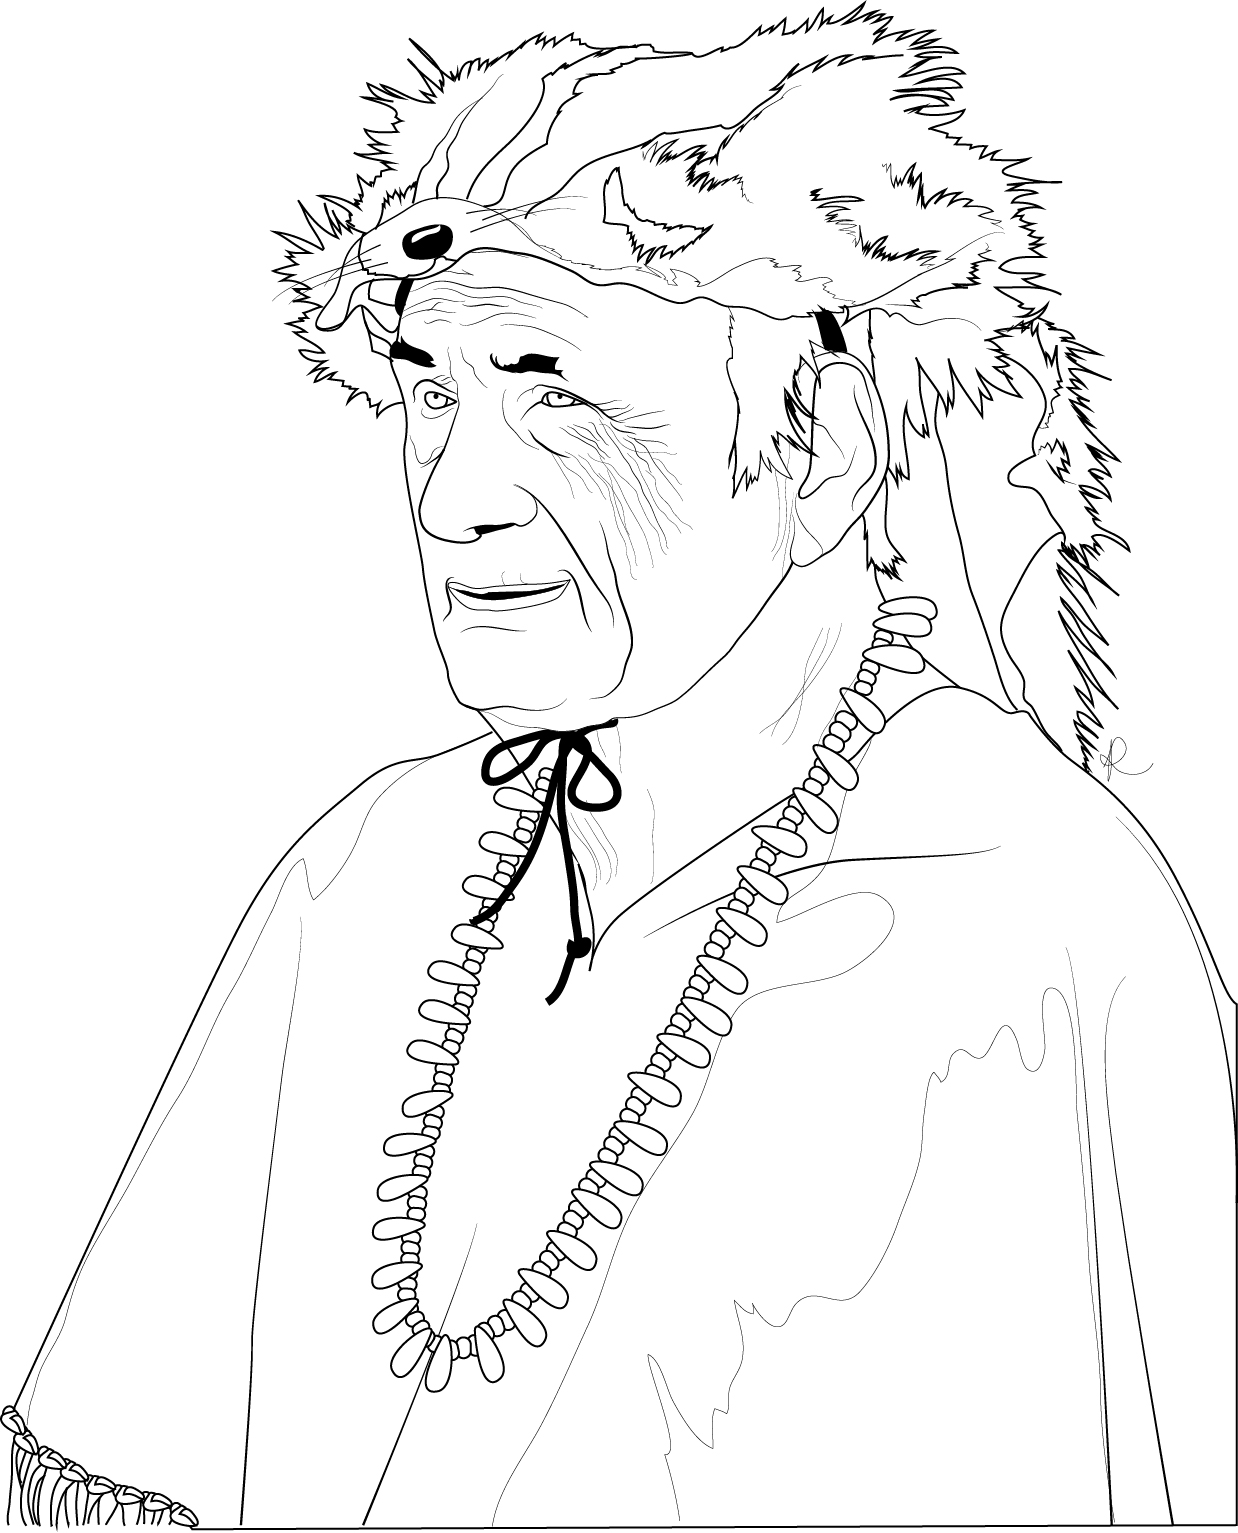 Free coloring pages â frisco native american museum